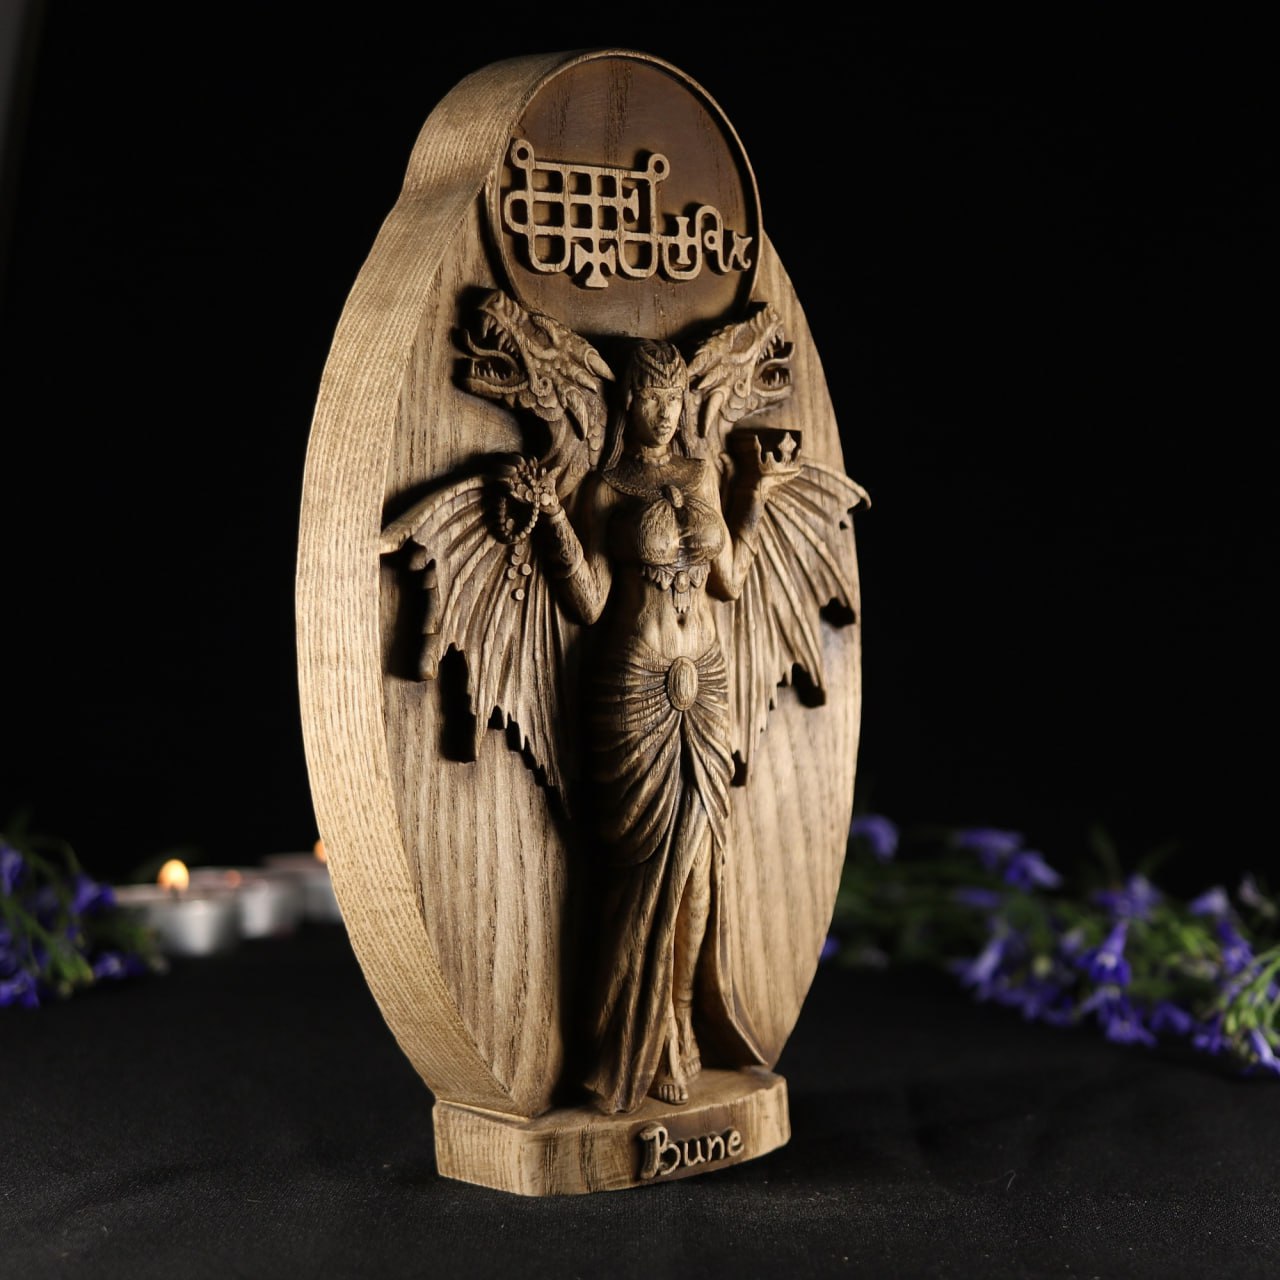 Handmade Wooden Statue Carving Bune of a Great and Powerful Duke